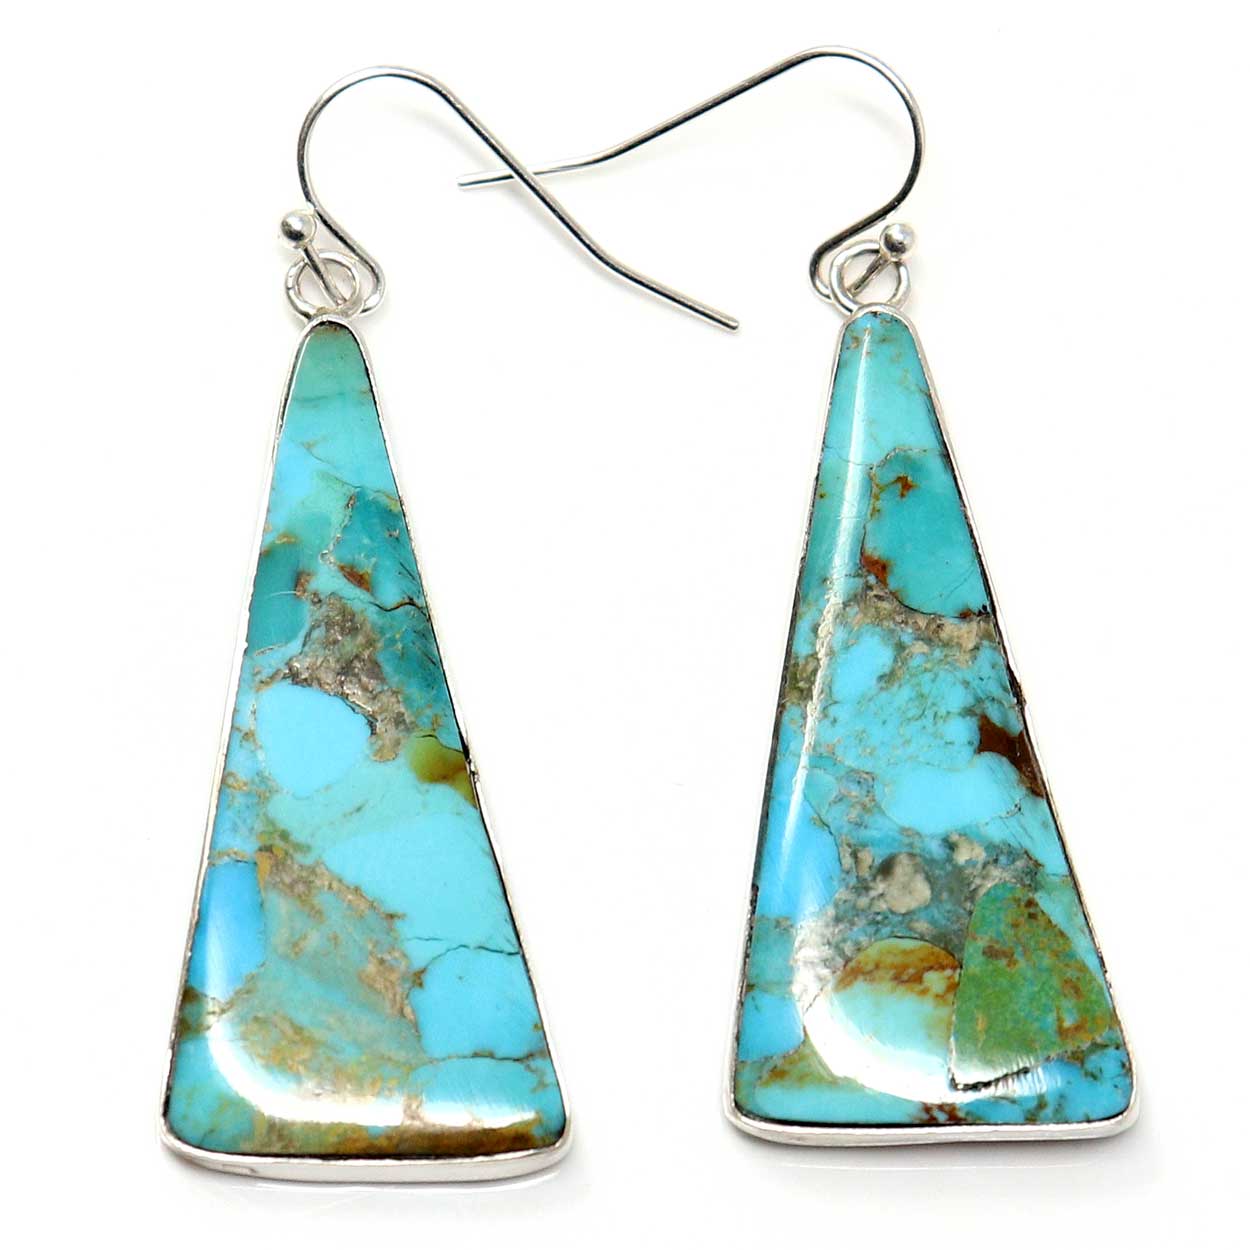 Pale  Blue-Green Turquoise Trapezoid  Earrings